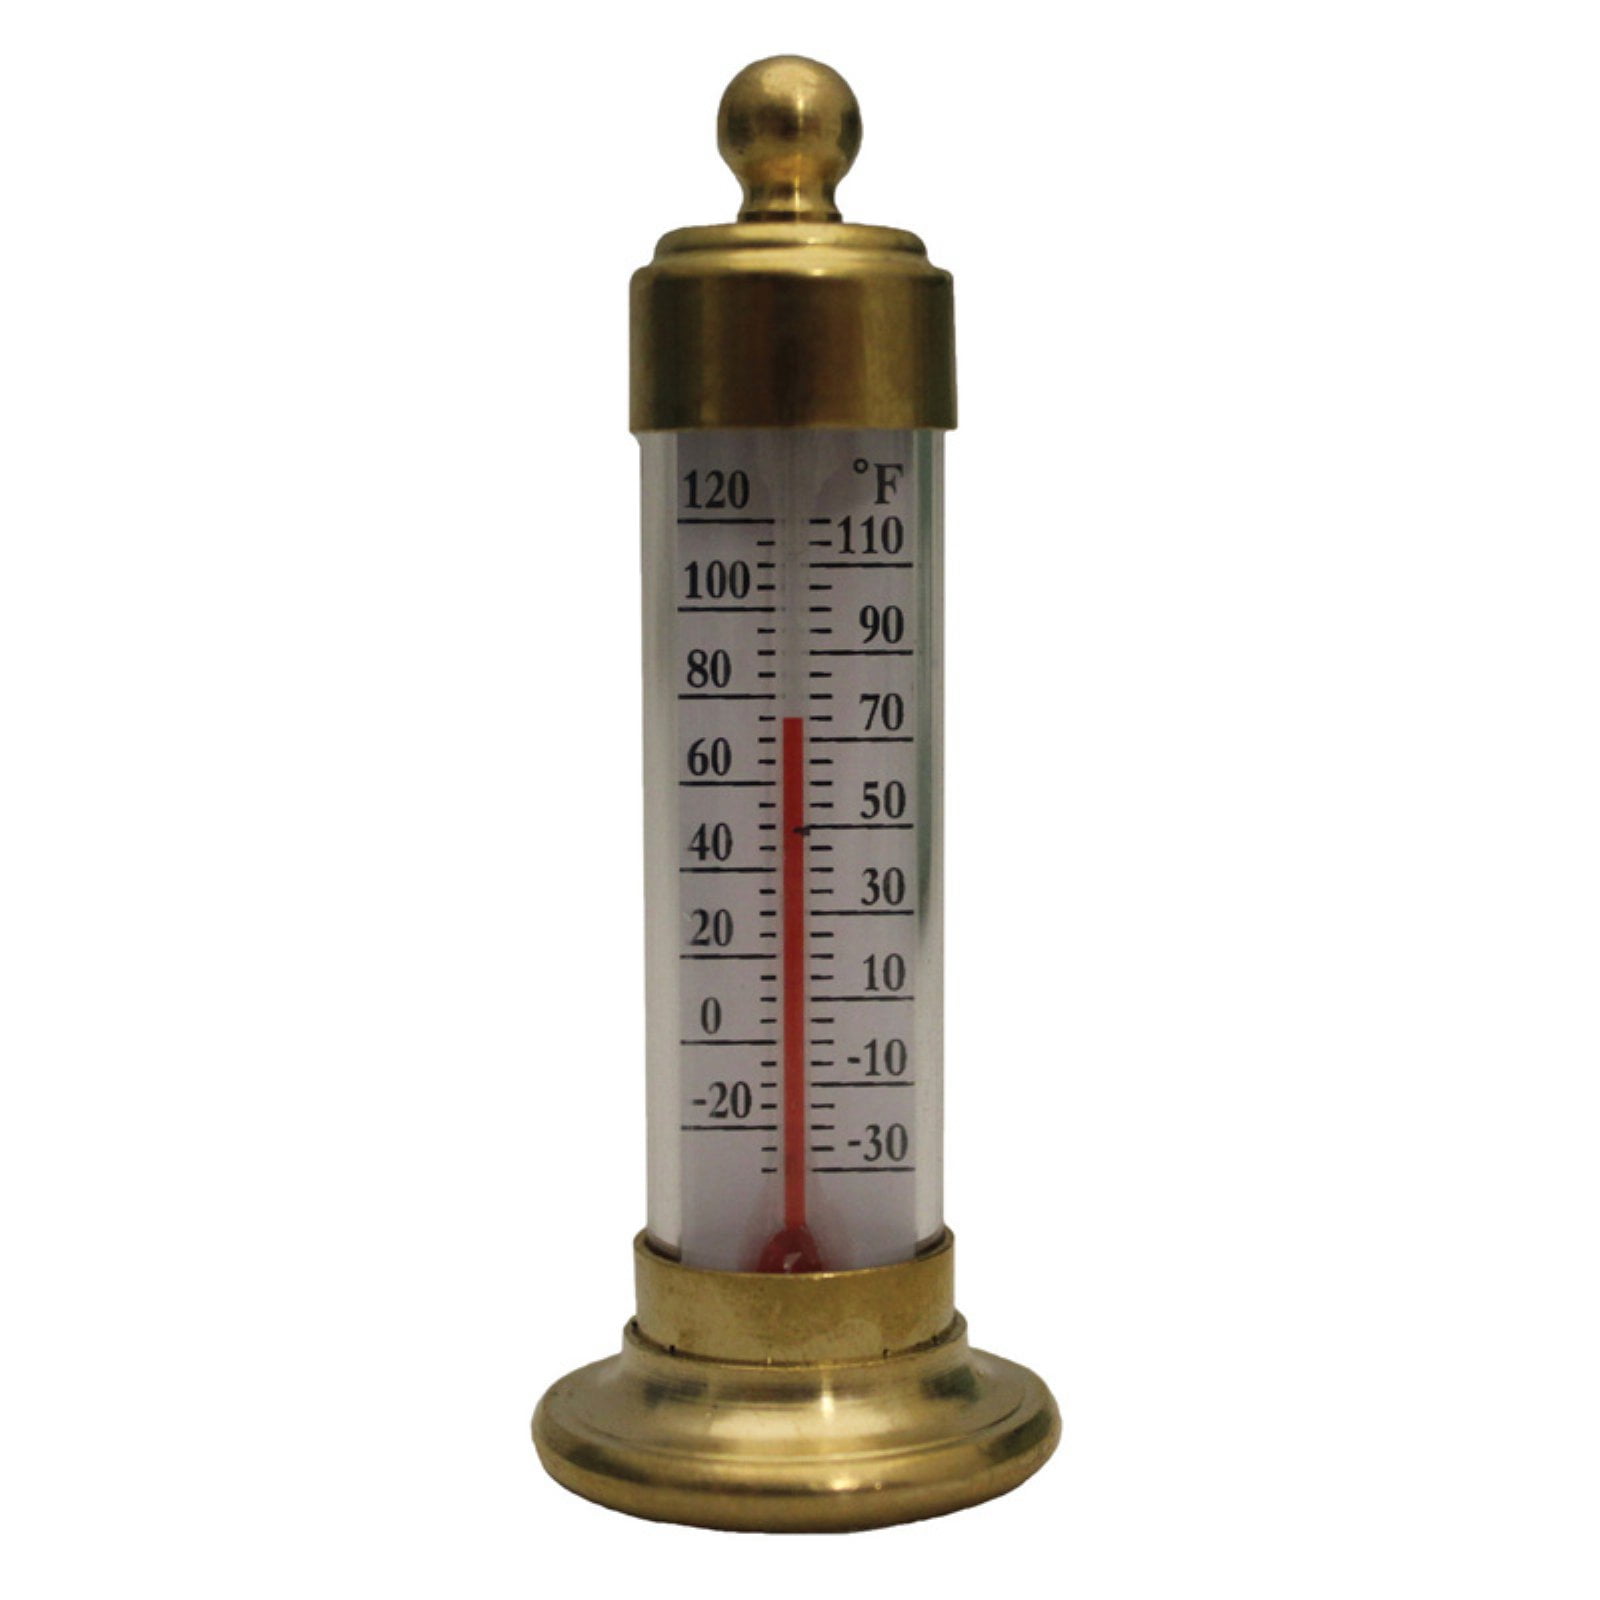 SALE - Vermont Outdoor Brass Thermometer by Conant T1LFB - $44.95